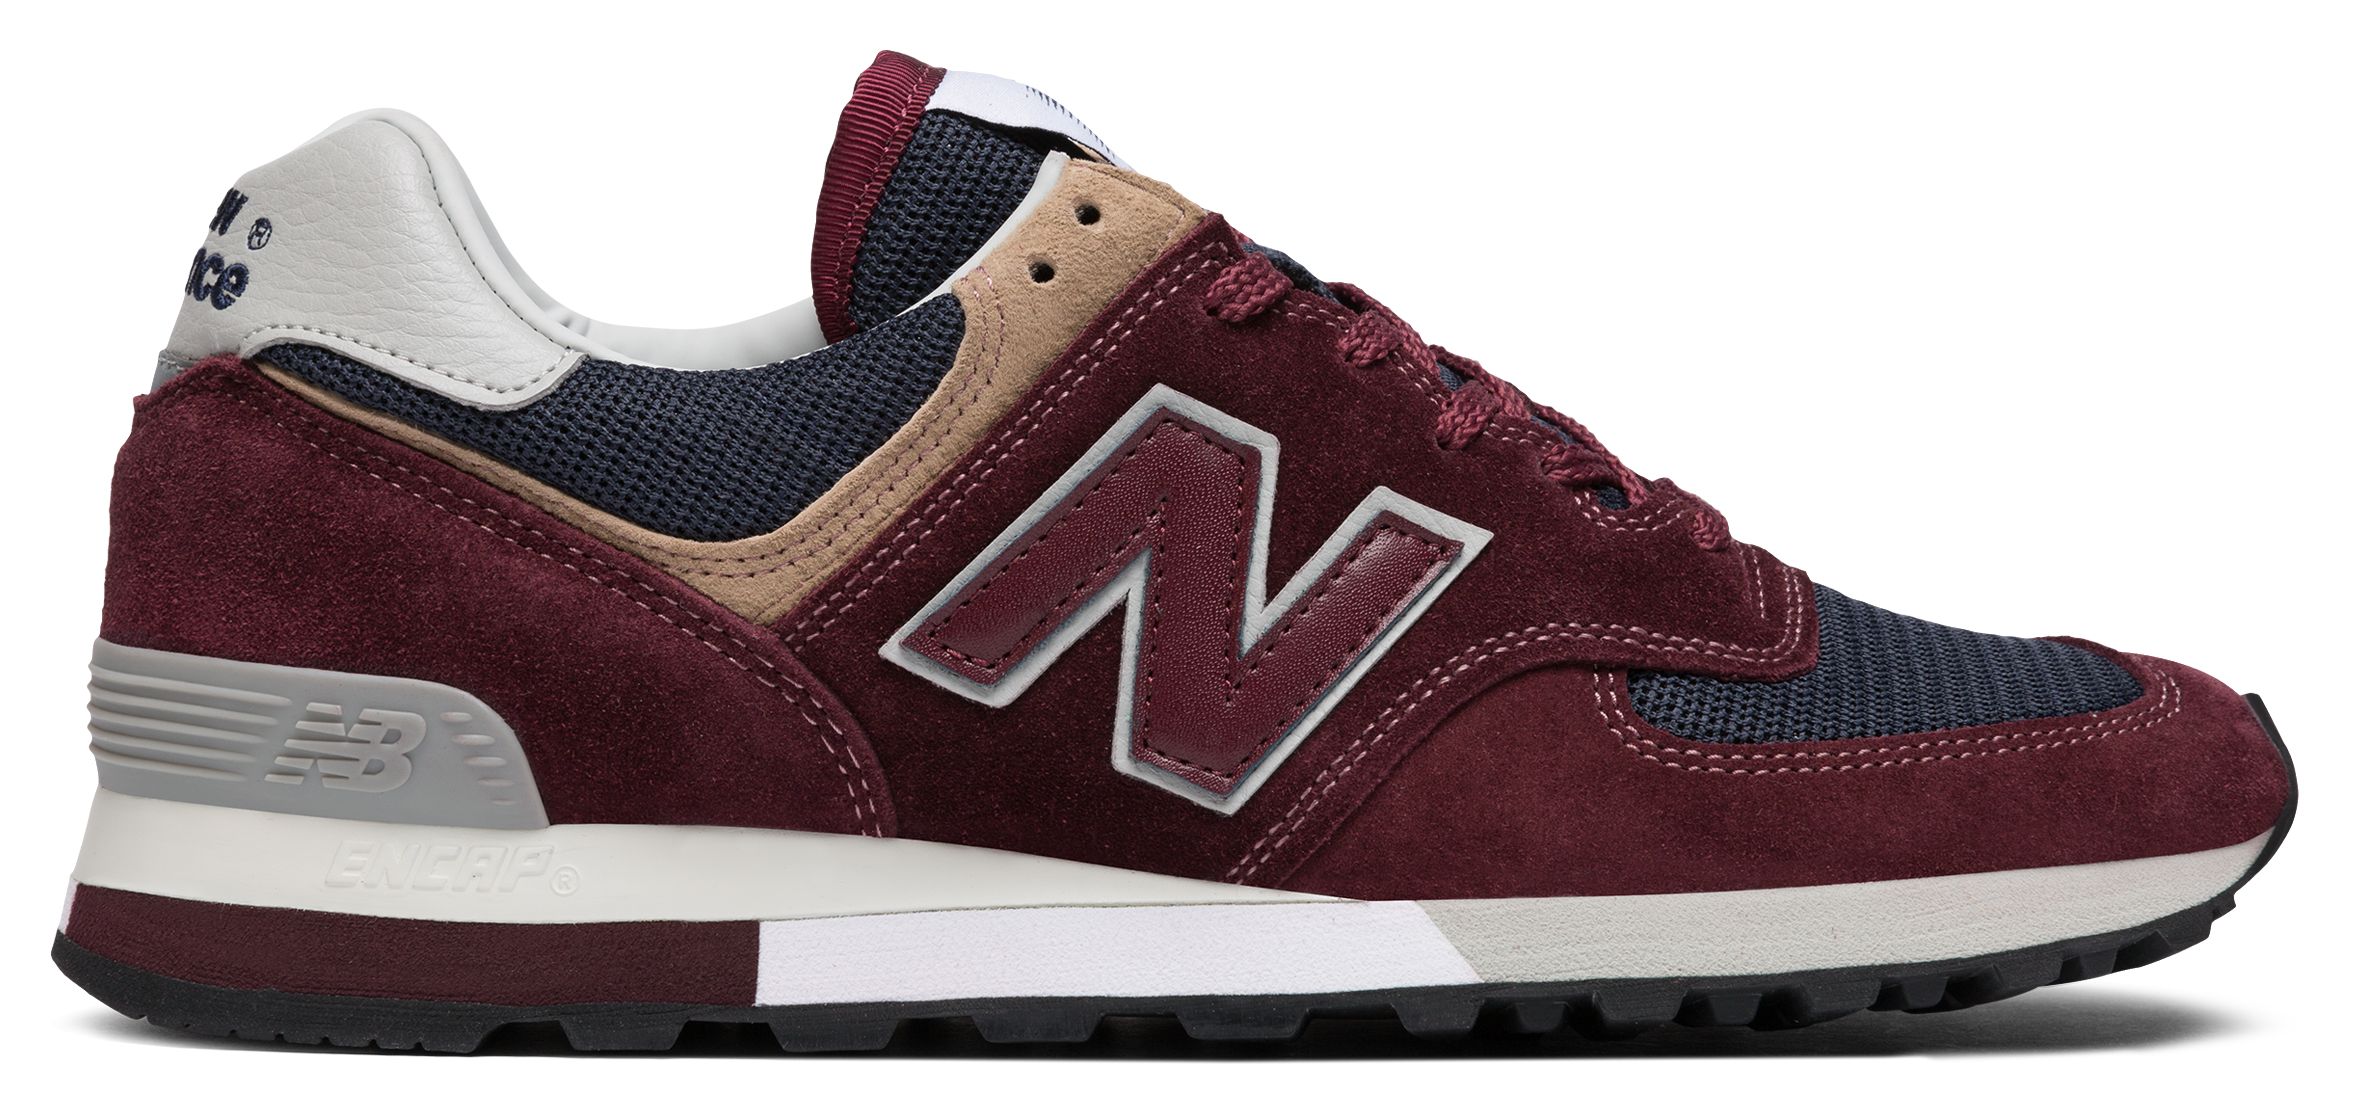 Chaussures 576 Made in UK Homme - New Balance